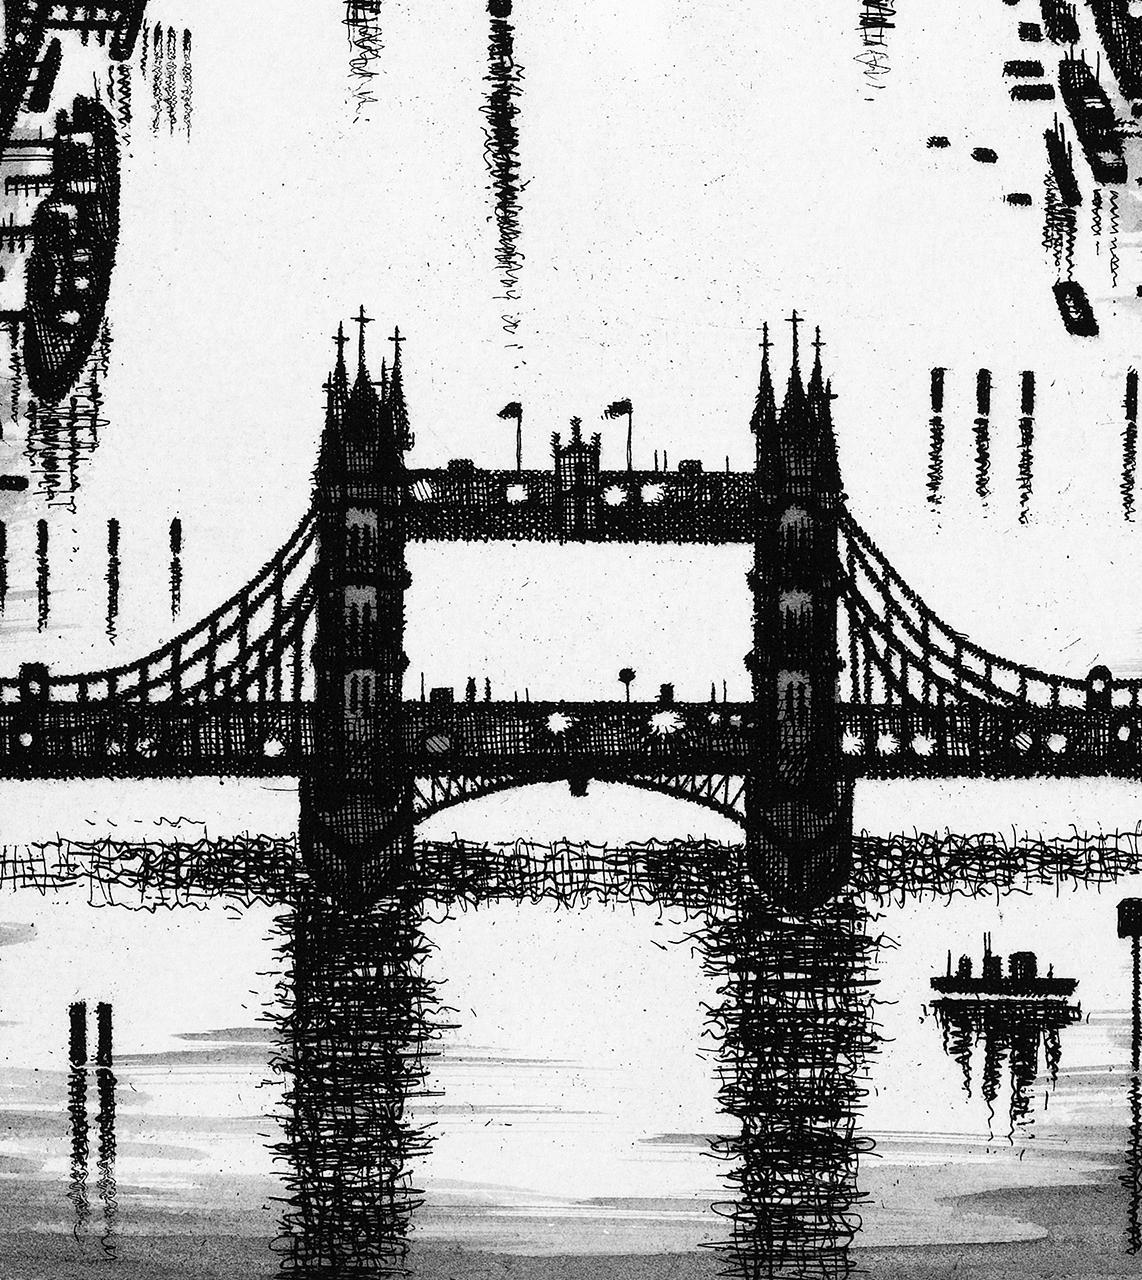 Thames Bridges – Looking West
John Duffin
Limited Edition Etching Printed on White 300g Somerset Paper
Edition of 150
Signed – John Duffin
Image Size: H 38cm x W 25cm
Sheet Size: H 56cm x W 38cm x D 0.1cm
This work is sold unframed
Free